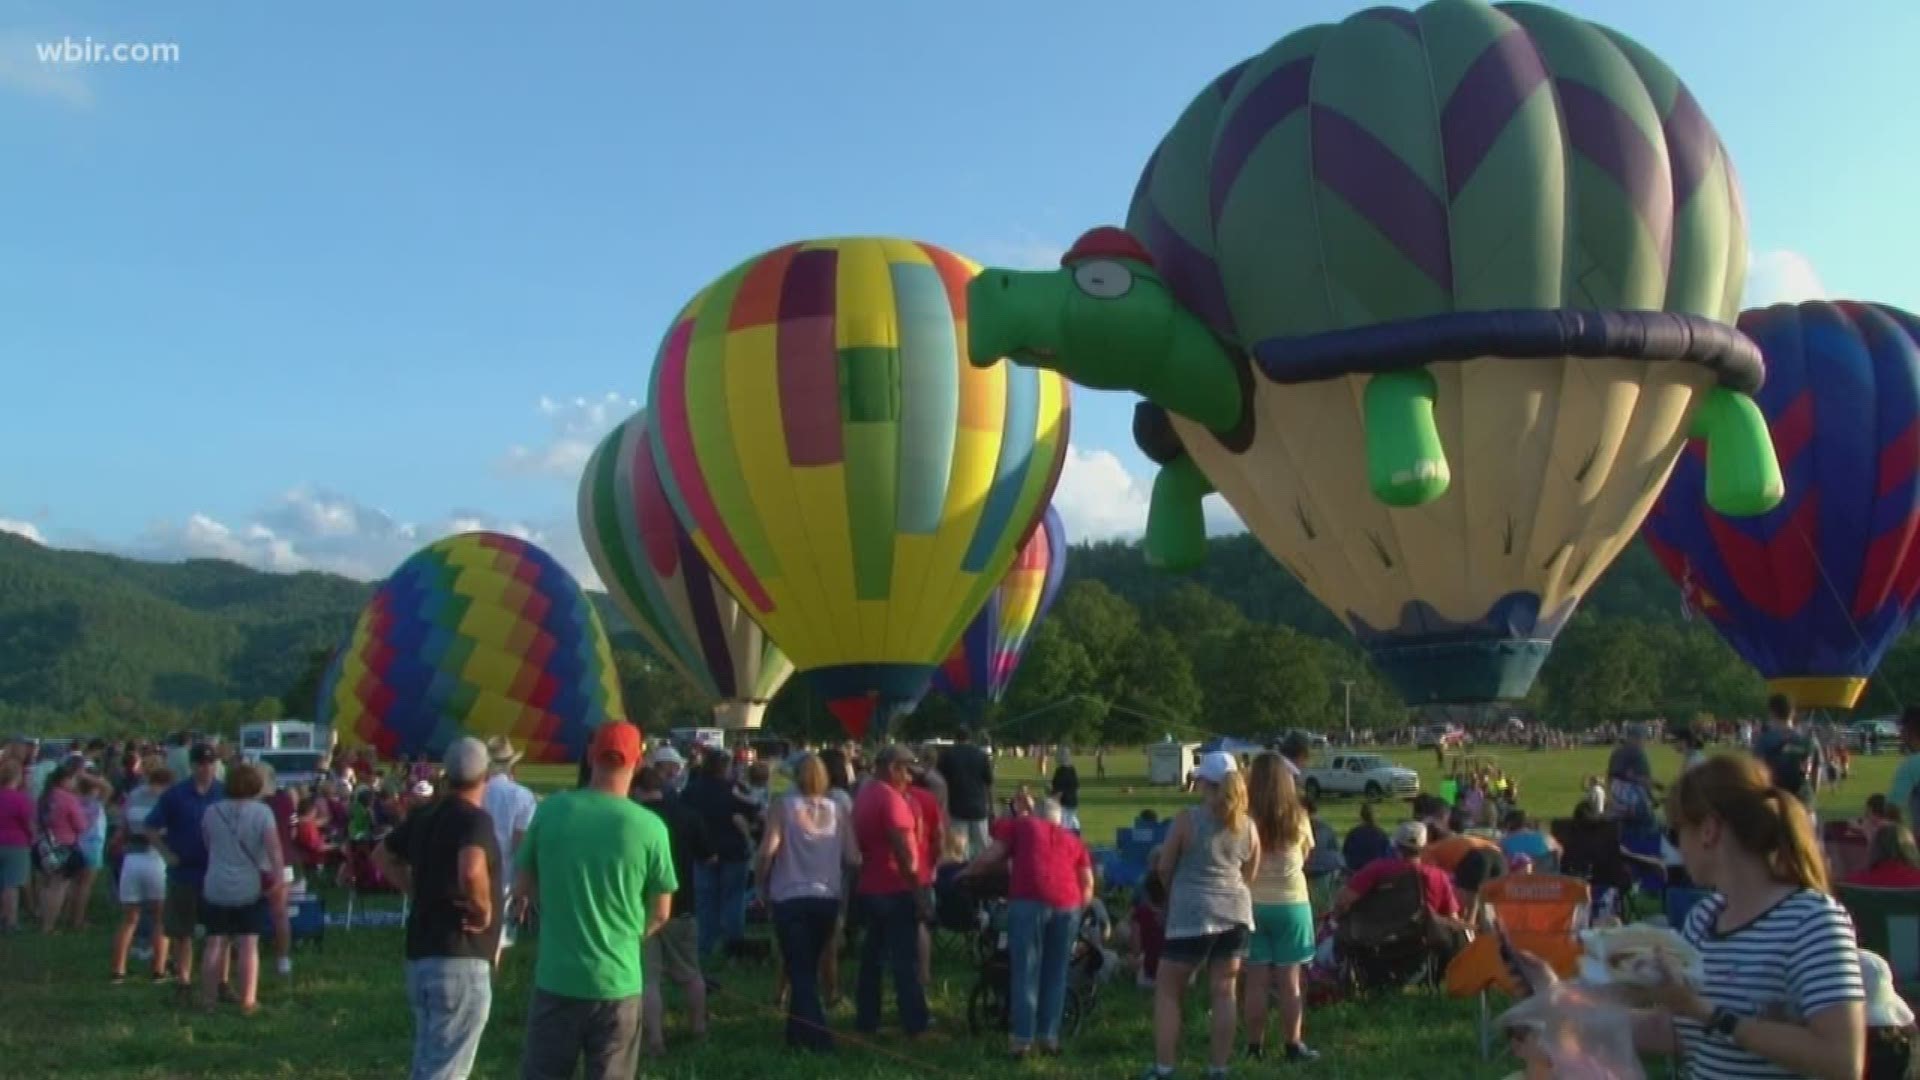 The festival in Townsend had live music, local beer and wine tastings and of course - hot air balloon rides!